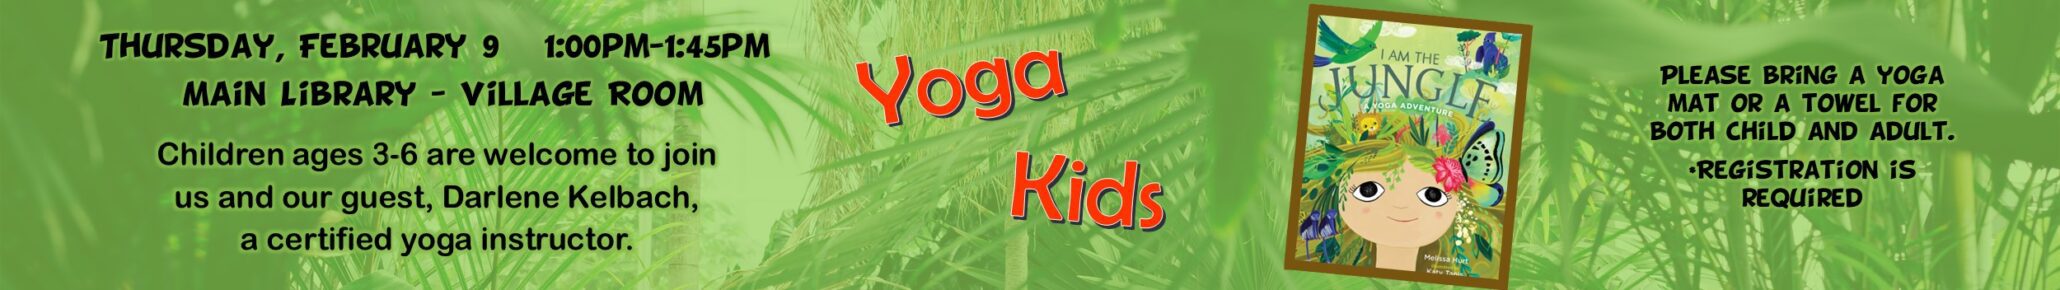 yoga kids at the main library on february 9